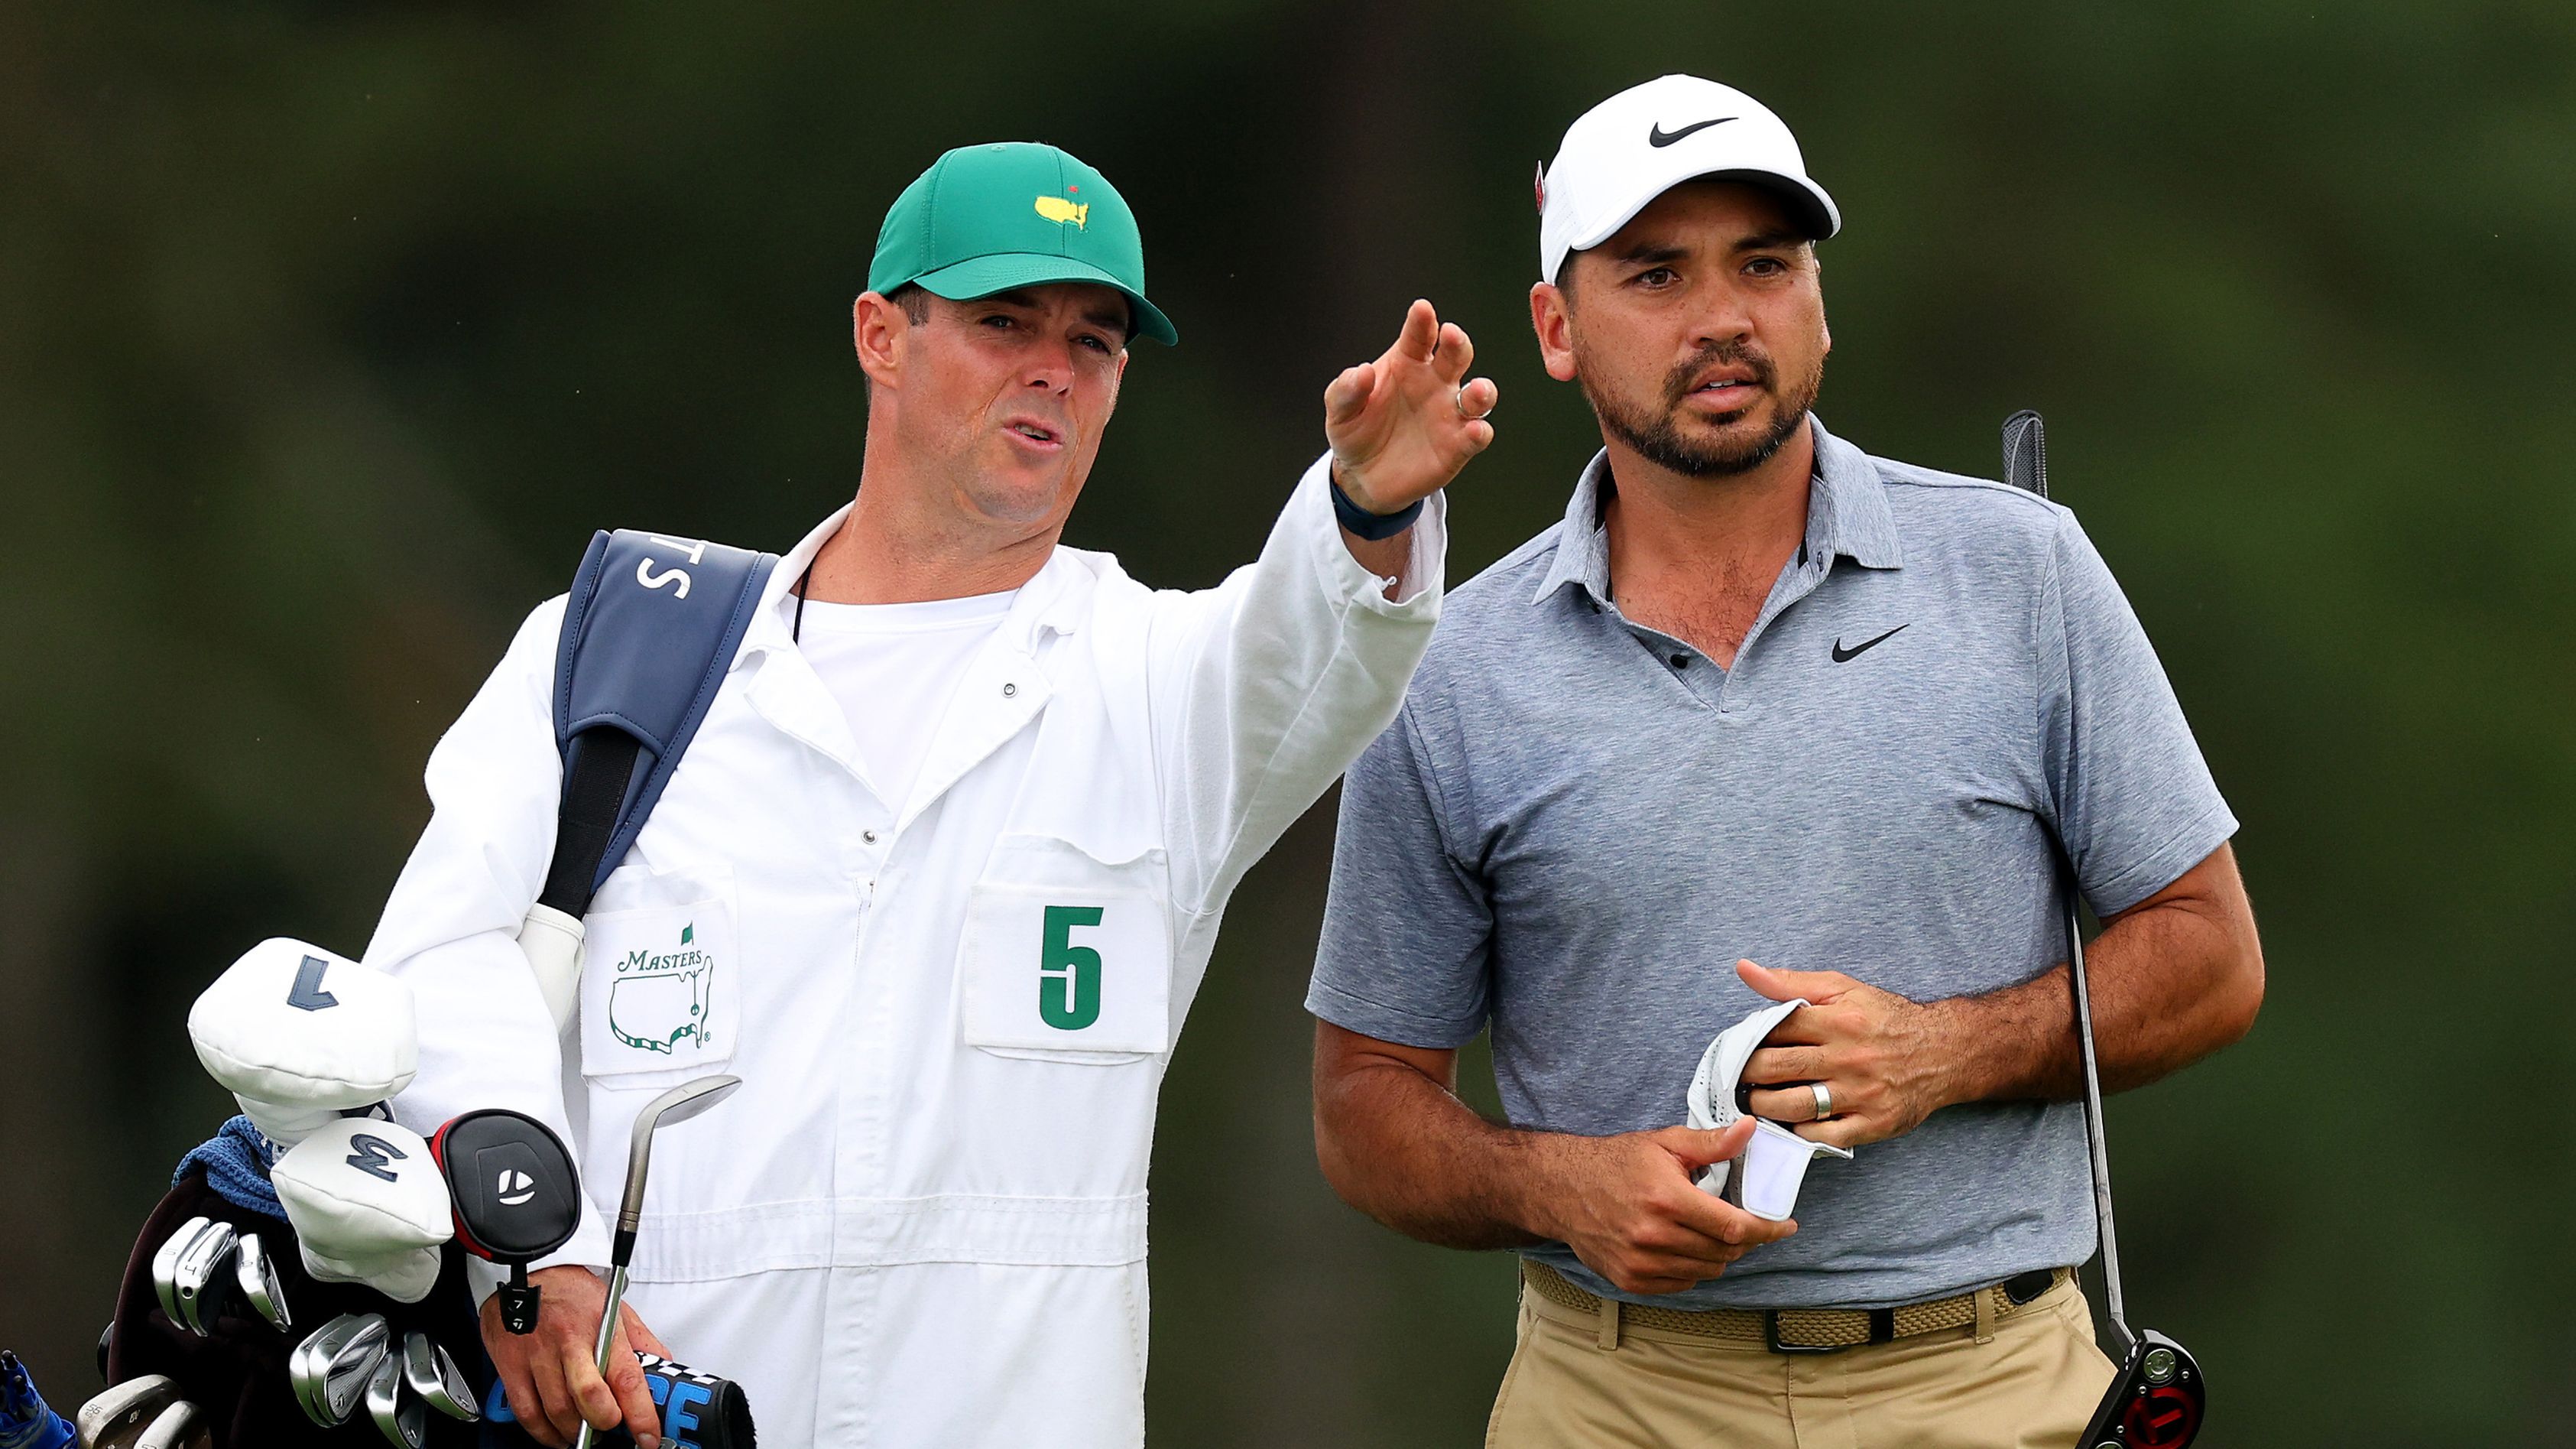 Jason Day of Australia talks with his caddie Luke Reardon on the 18th hole during the first round of the 2023 Masters Tournament at Augusta National Golf Club on April 06, 2023 in Augusta, Georgia. (Photo by Andrew Redington/Getty Images)